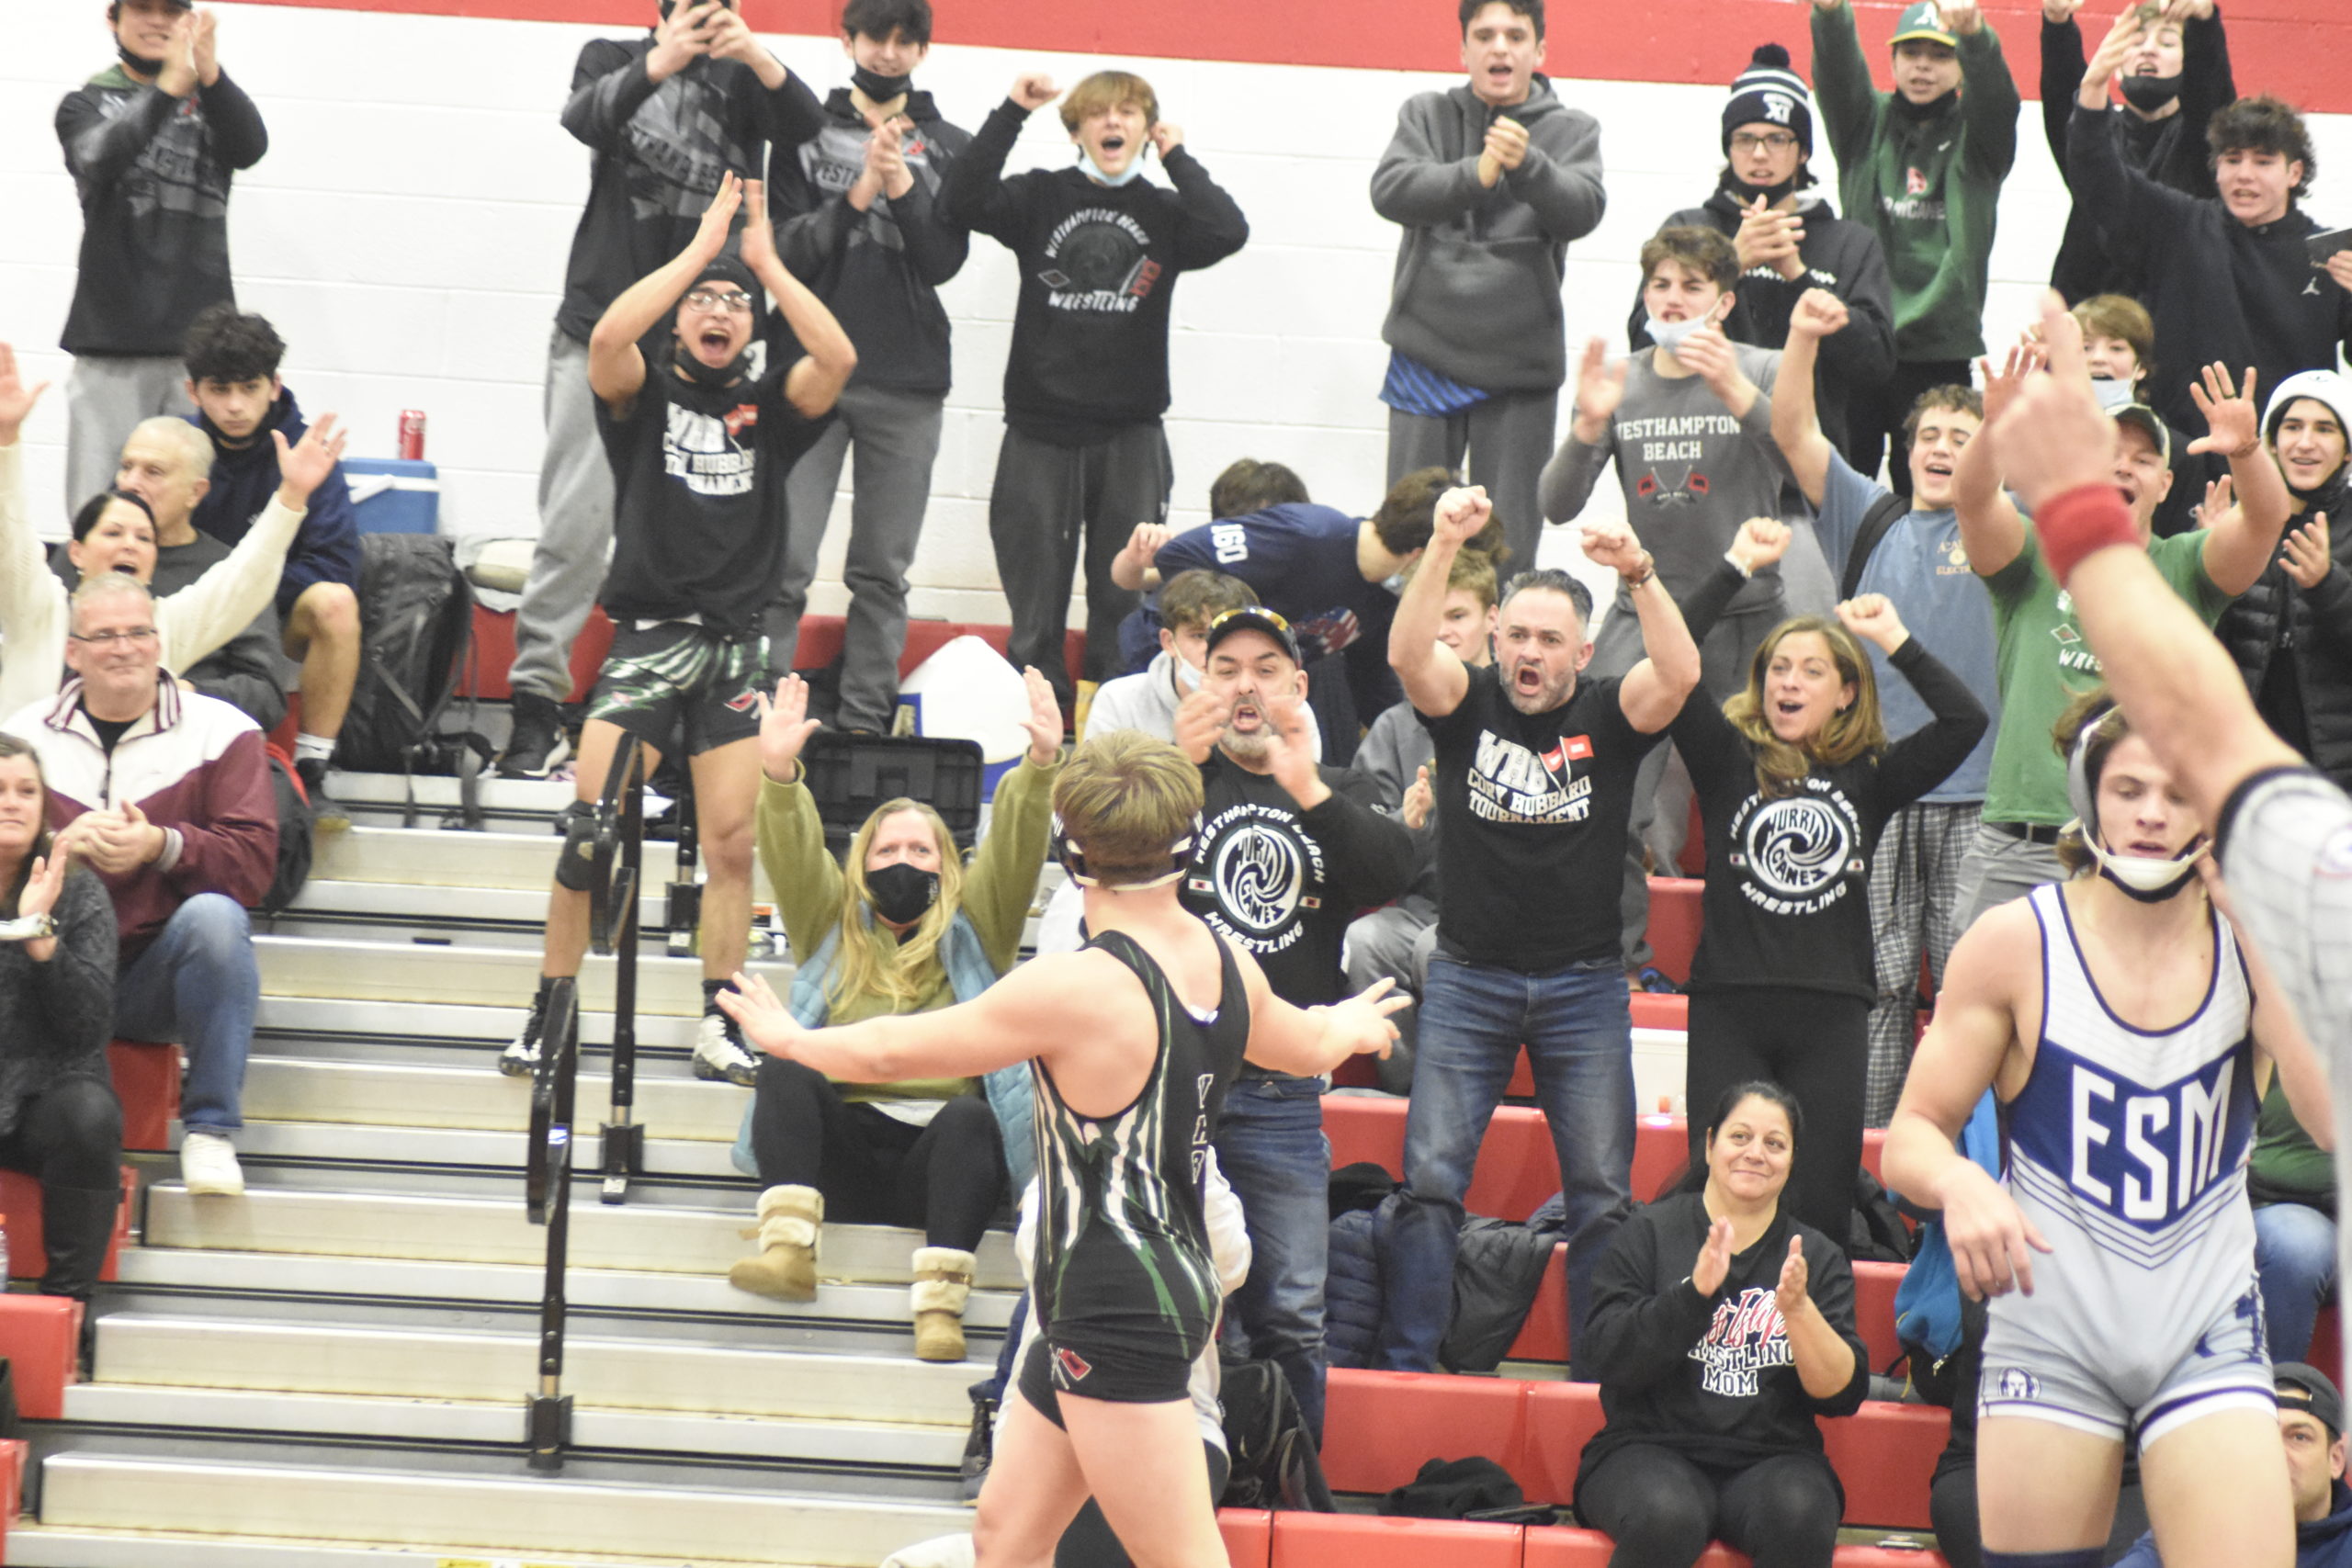 The Westhampton Beach crowd is pumped up after Dom Jurgel won the league title at 172 pounds.